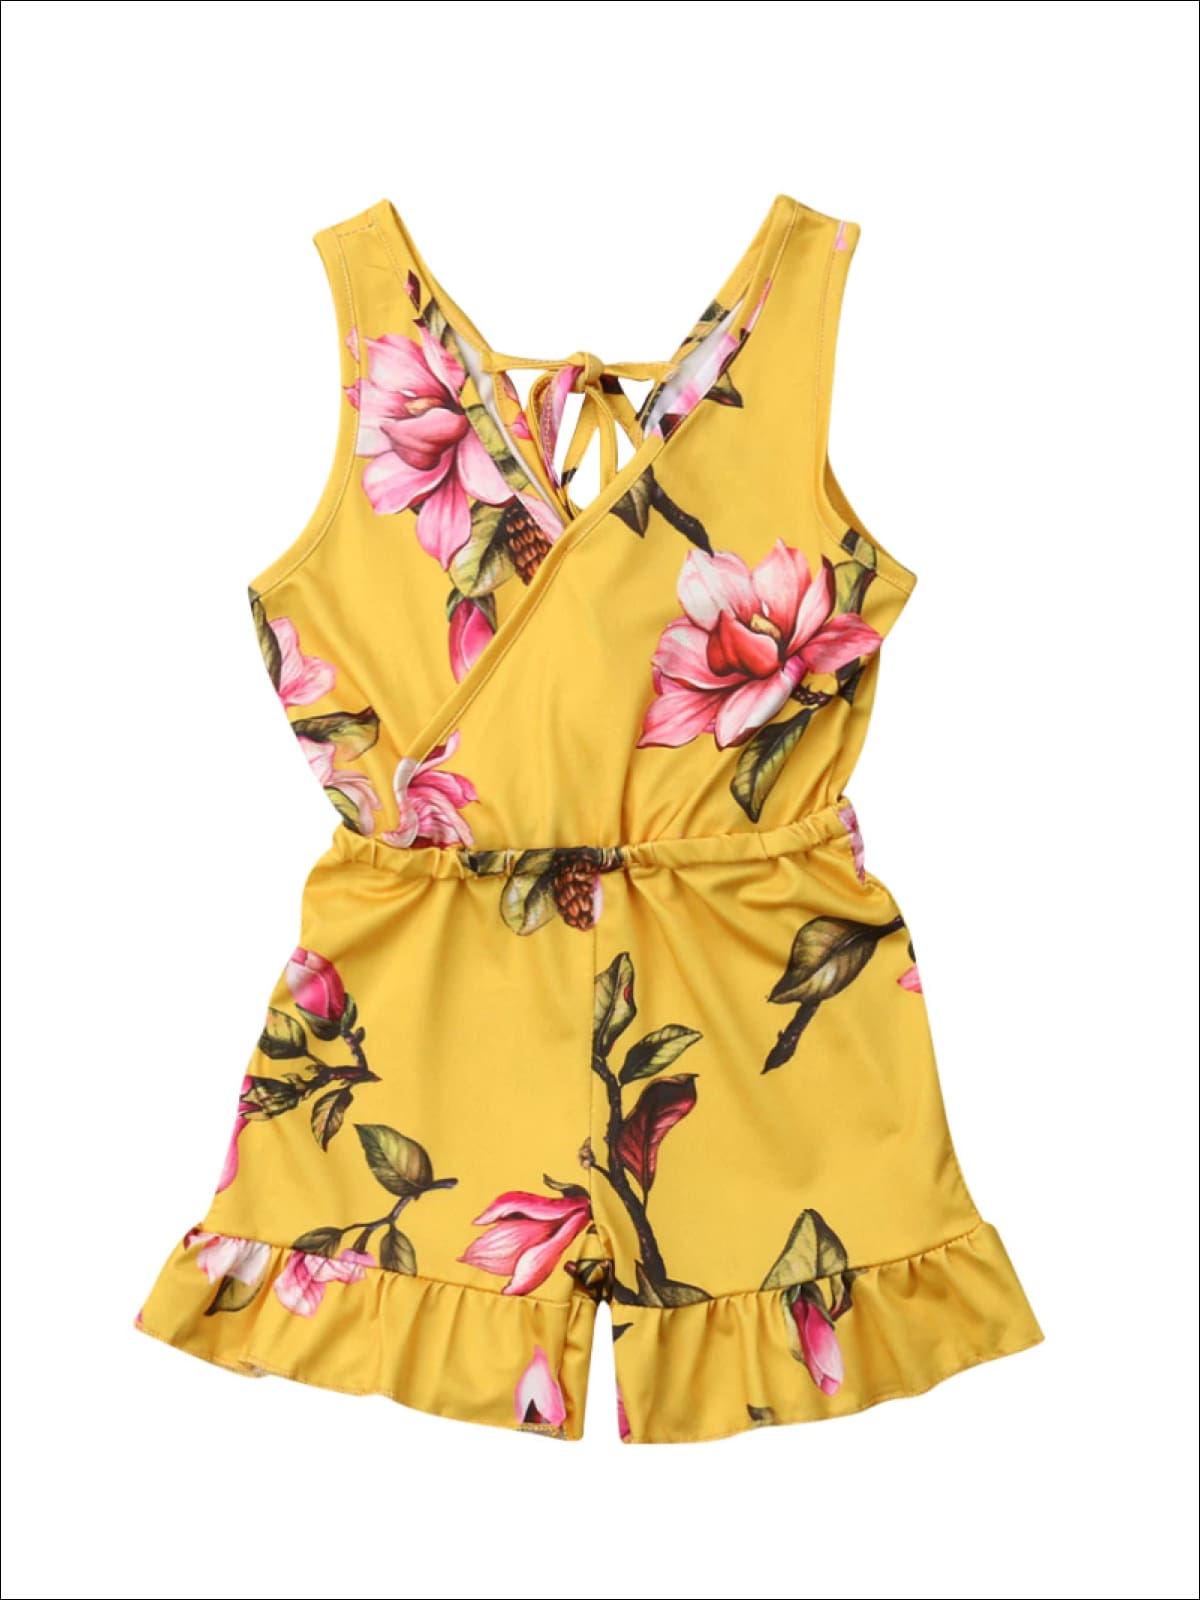 Mia Belle Overseas Fulfillment Resort Ready Girls Outfits | Toddler Floral Crop Top & Shorts Set Yellow / 6Y